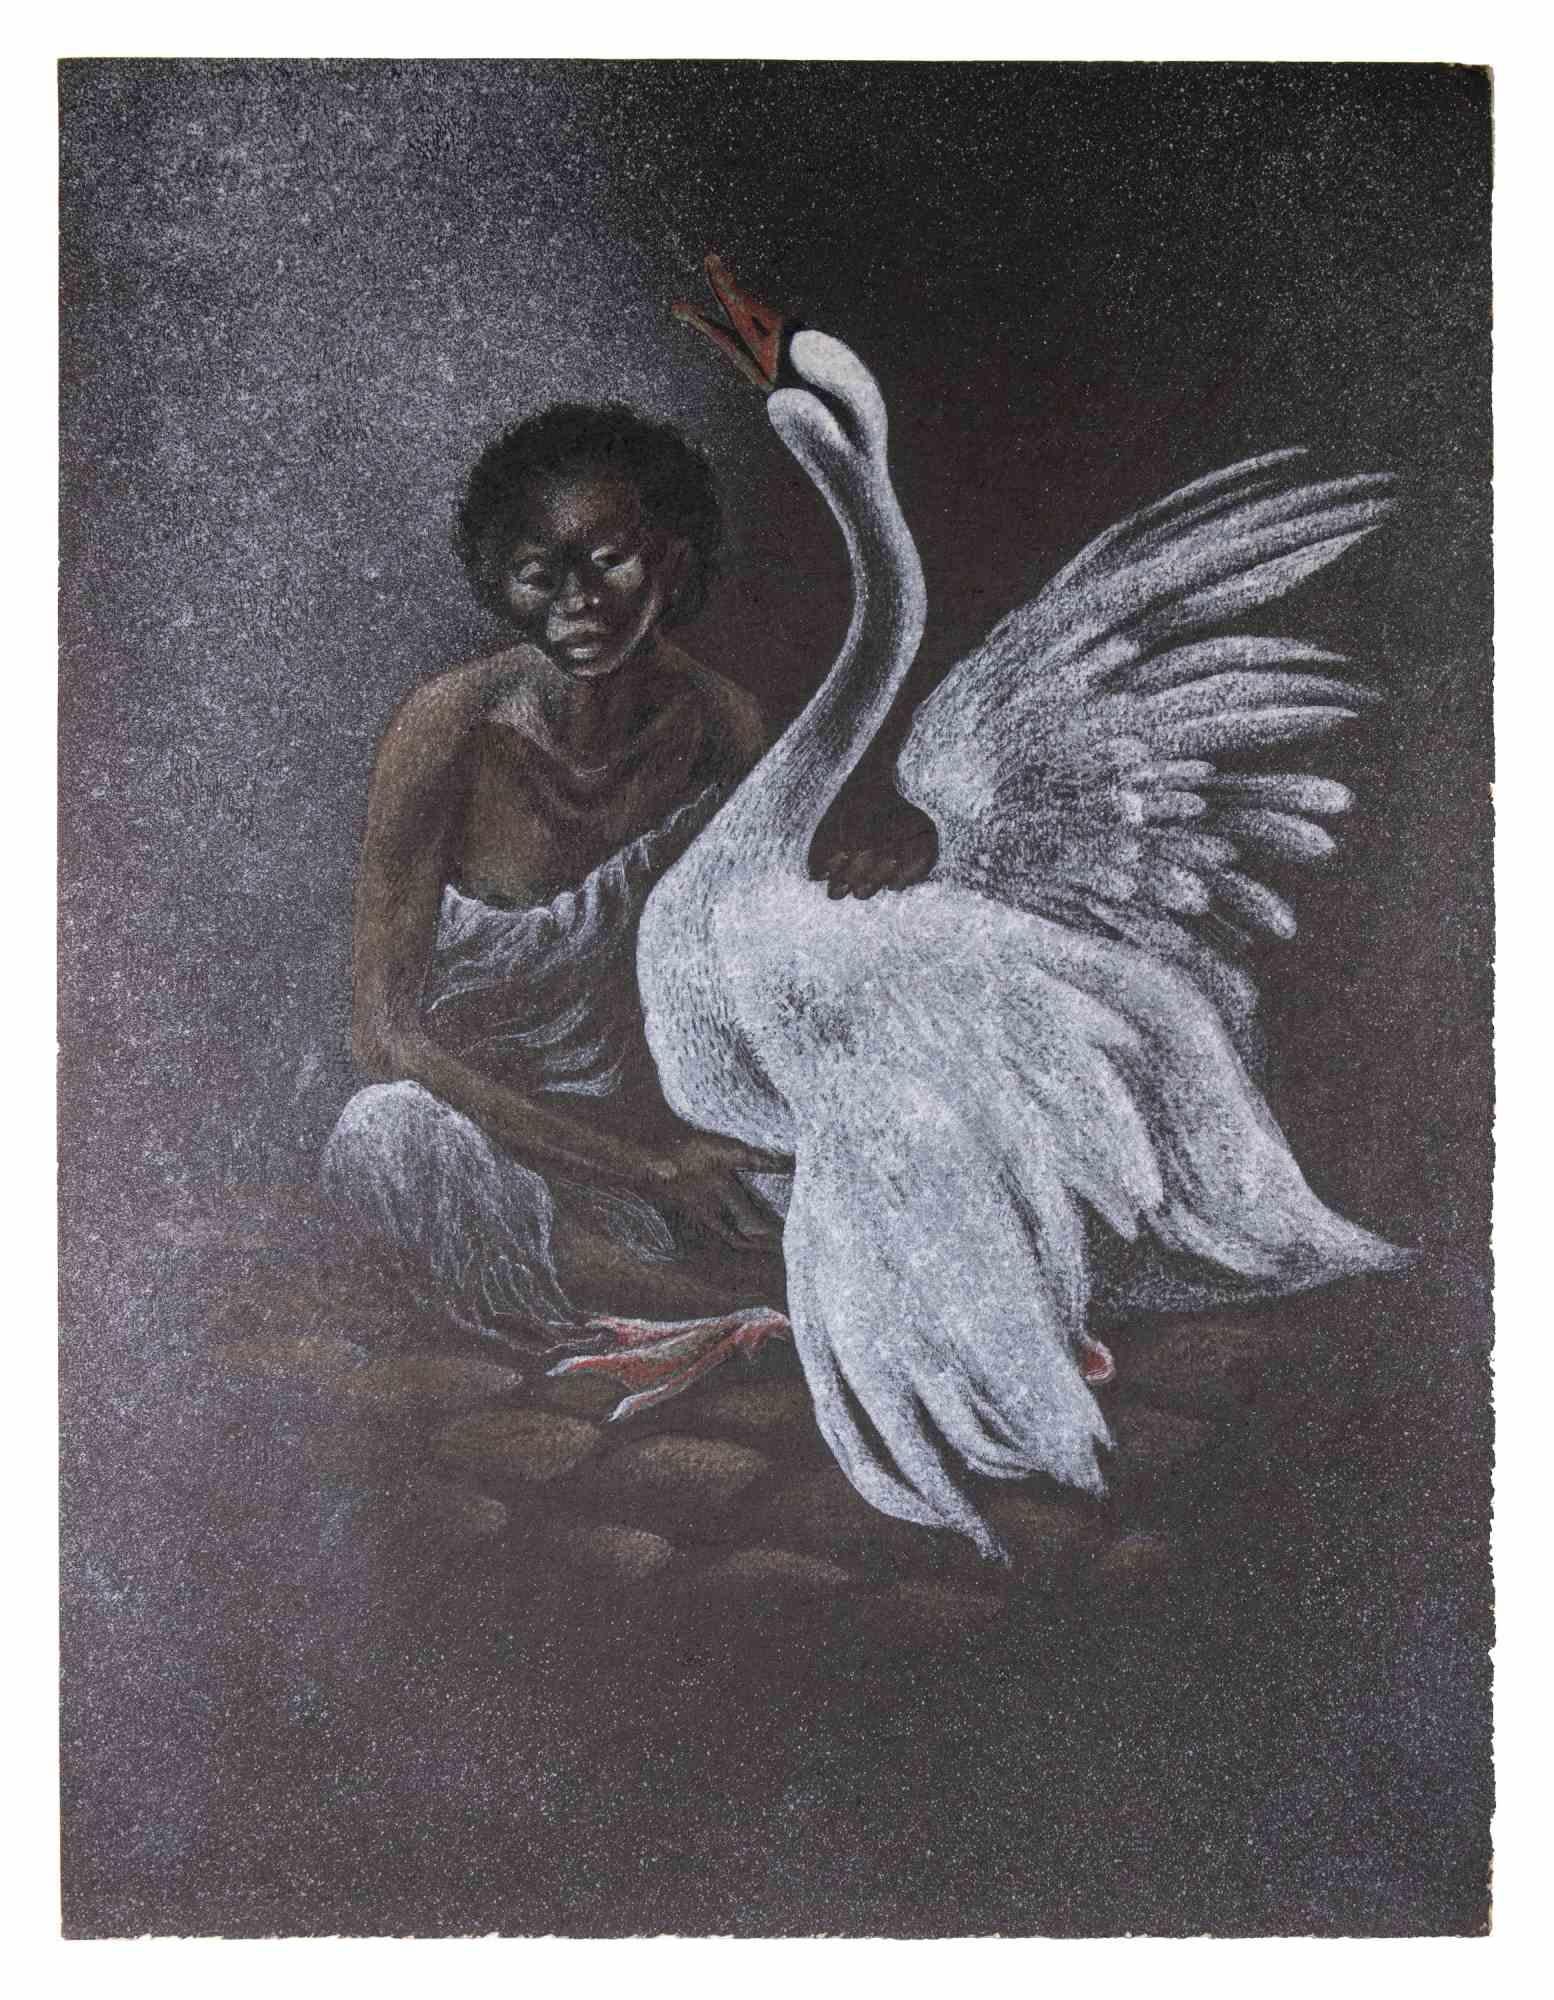 The Swan Song - Mixed Media by Bernadette Kelly - 1980s